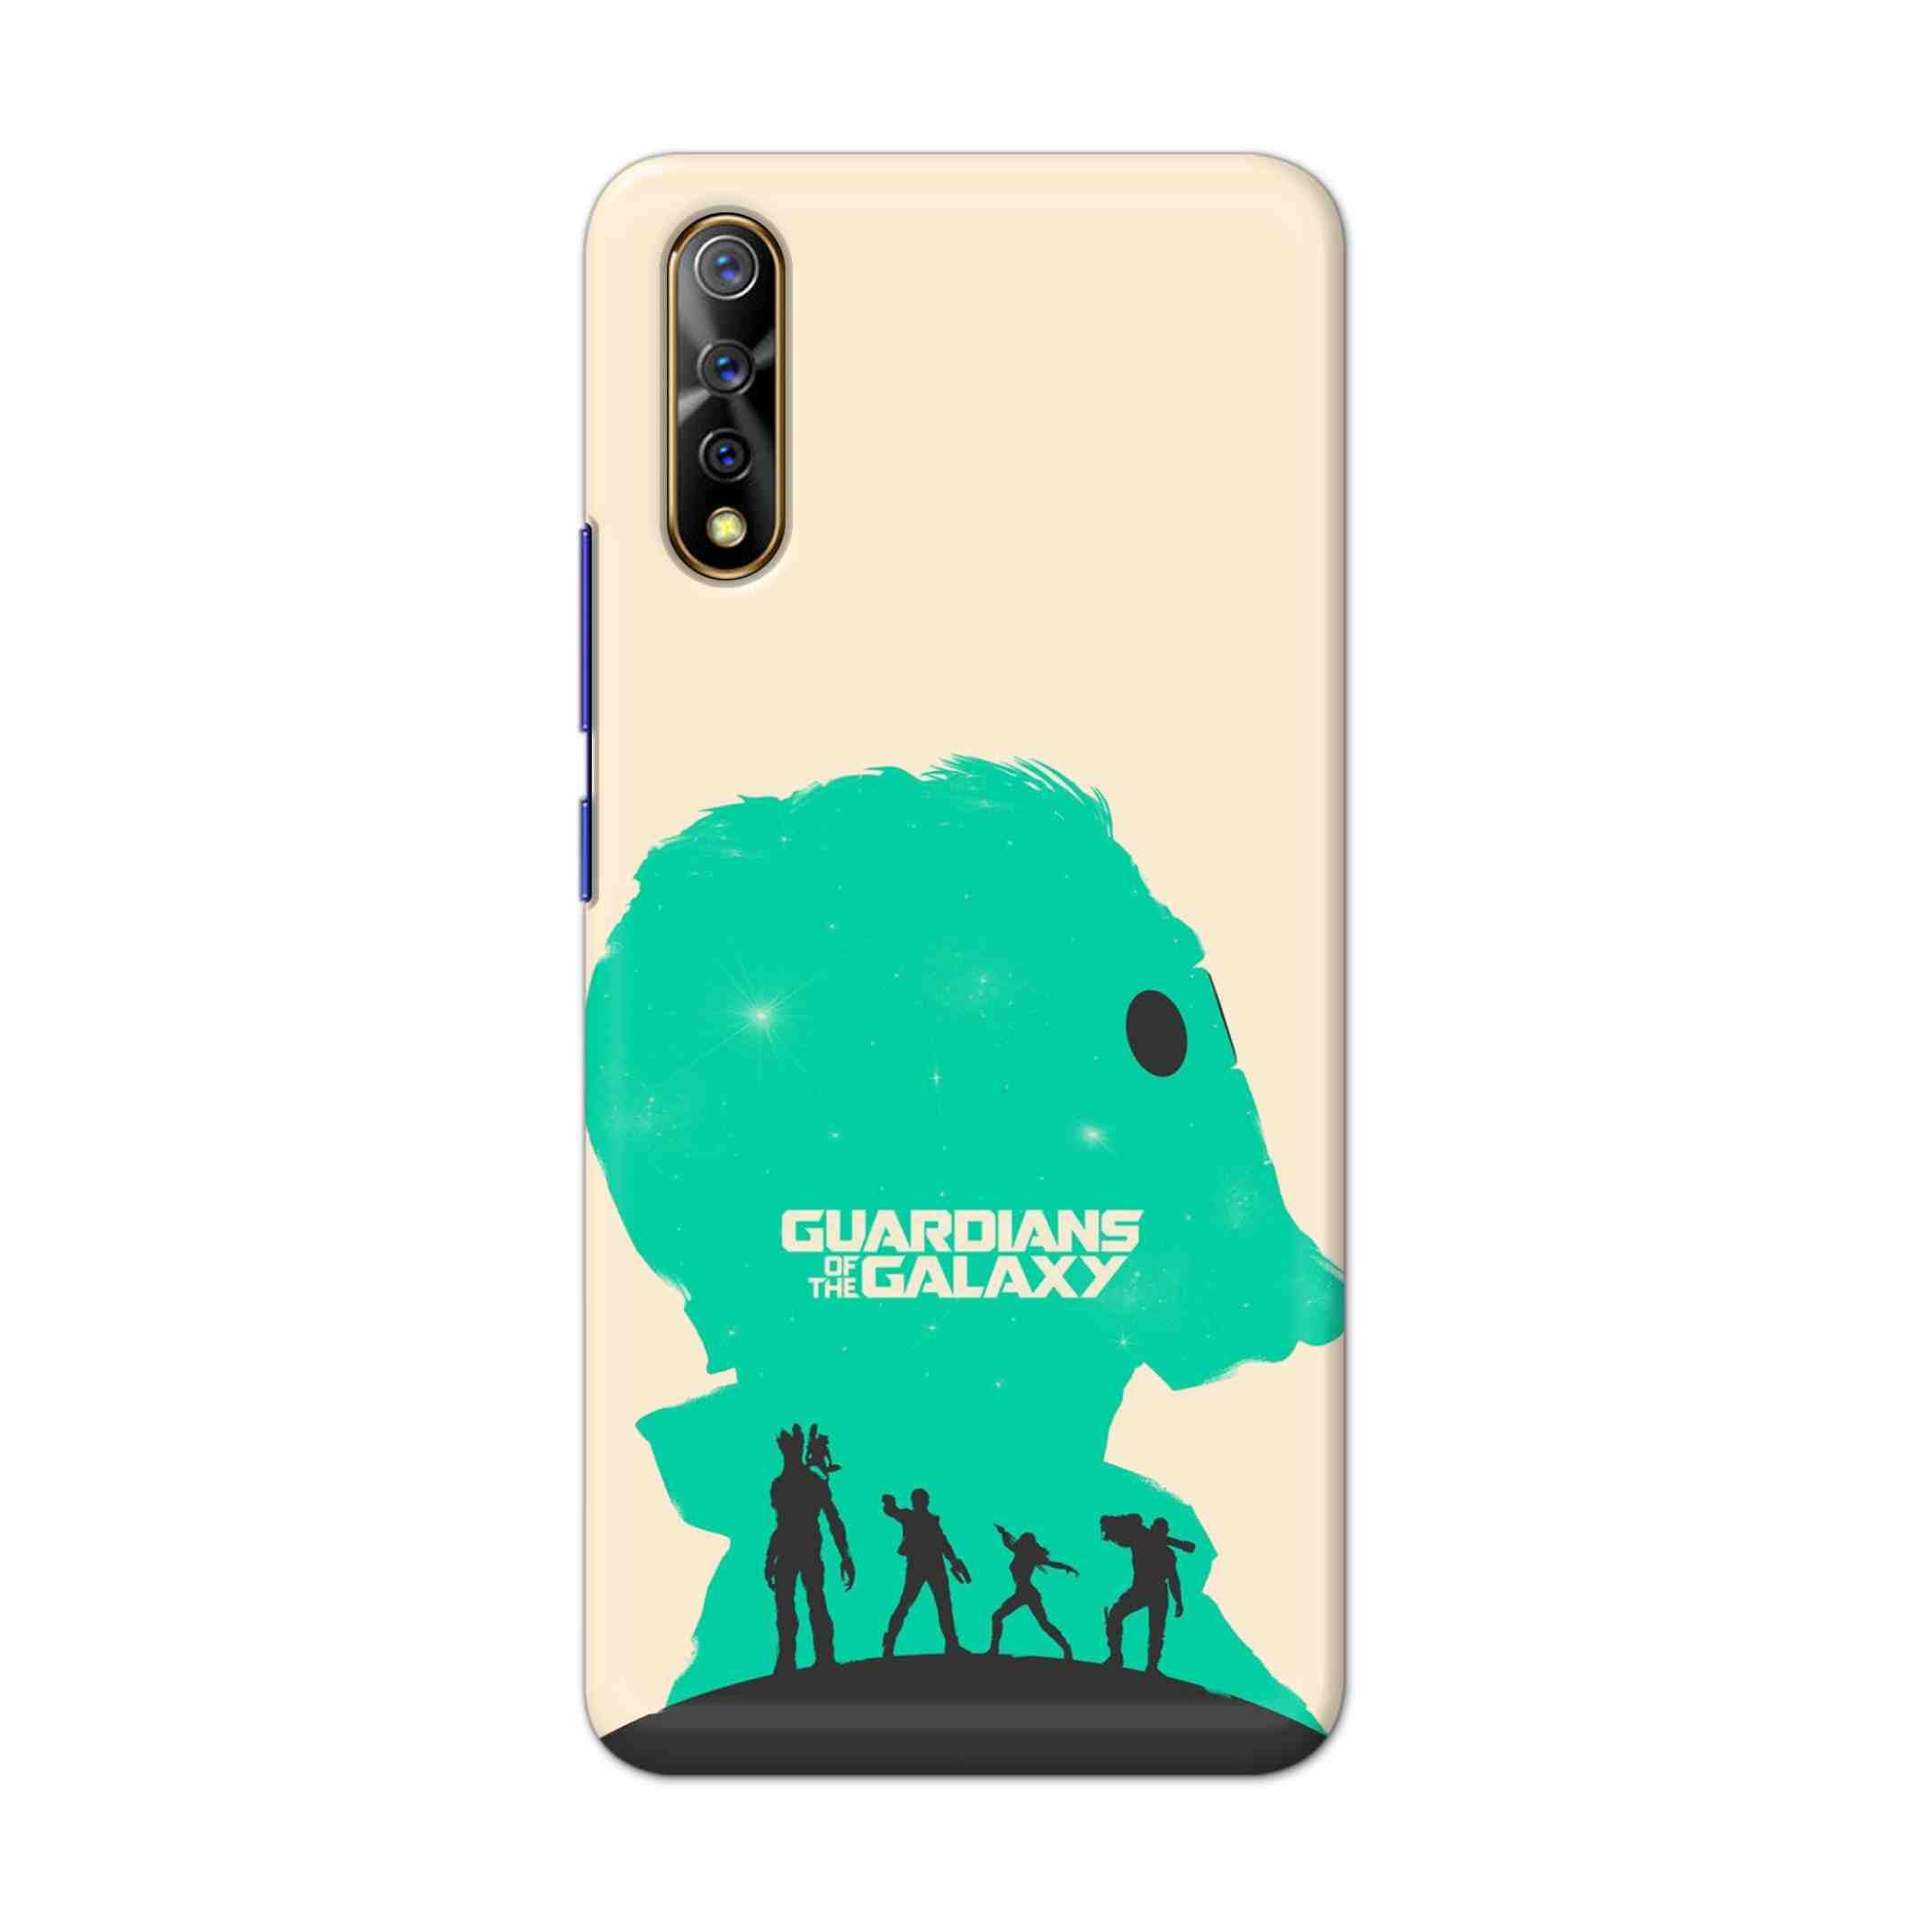 Buy Guardian Of The Galaxy Hard Back Mobile Phone Case Cover For Vivo S1 / Z1x Online